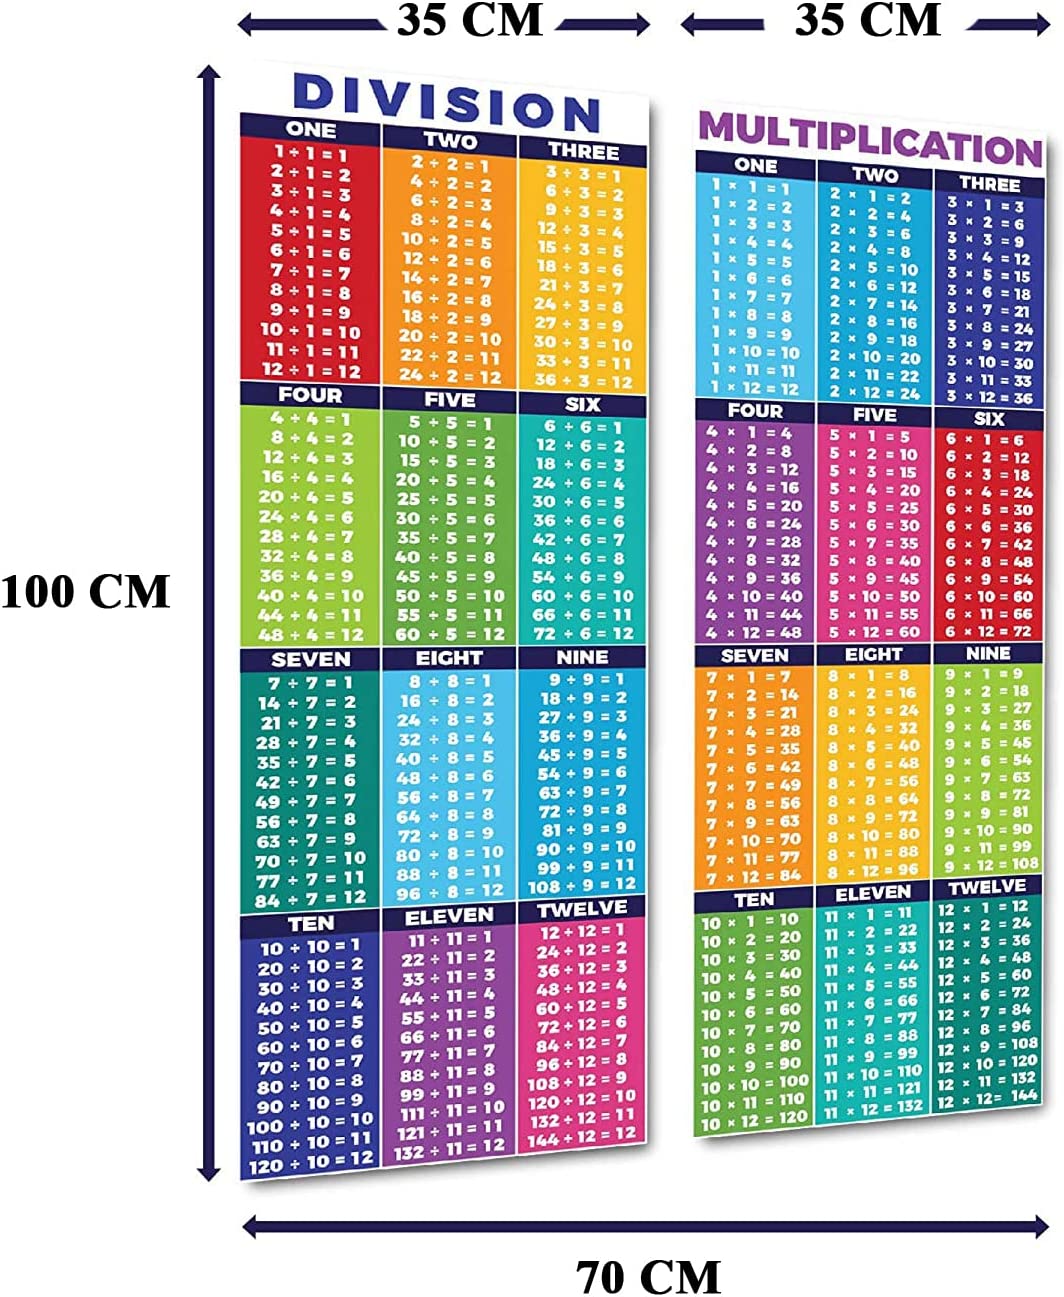 Educational mathematics poster for division and multiplication tables 35×100 cm - Multi Color